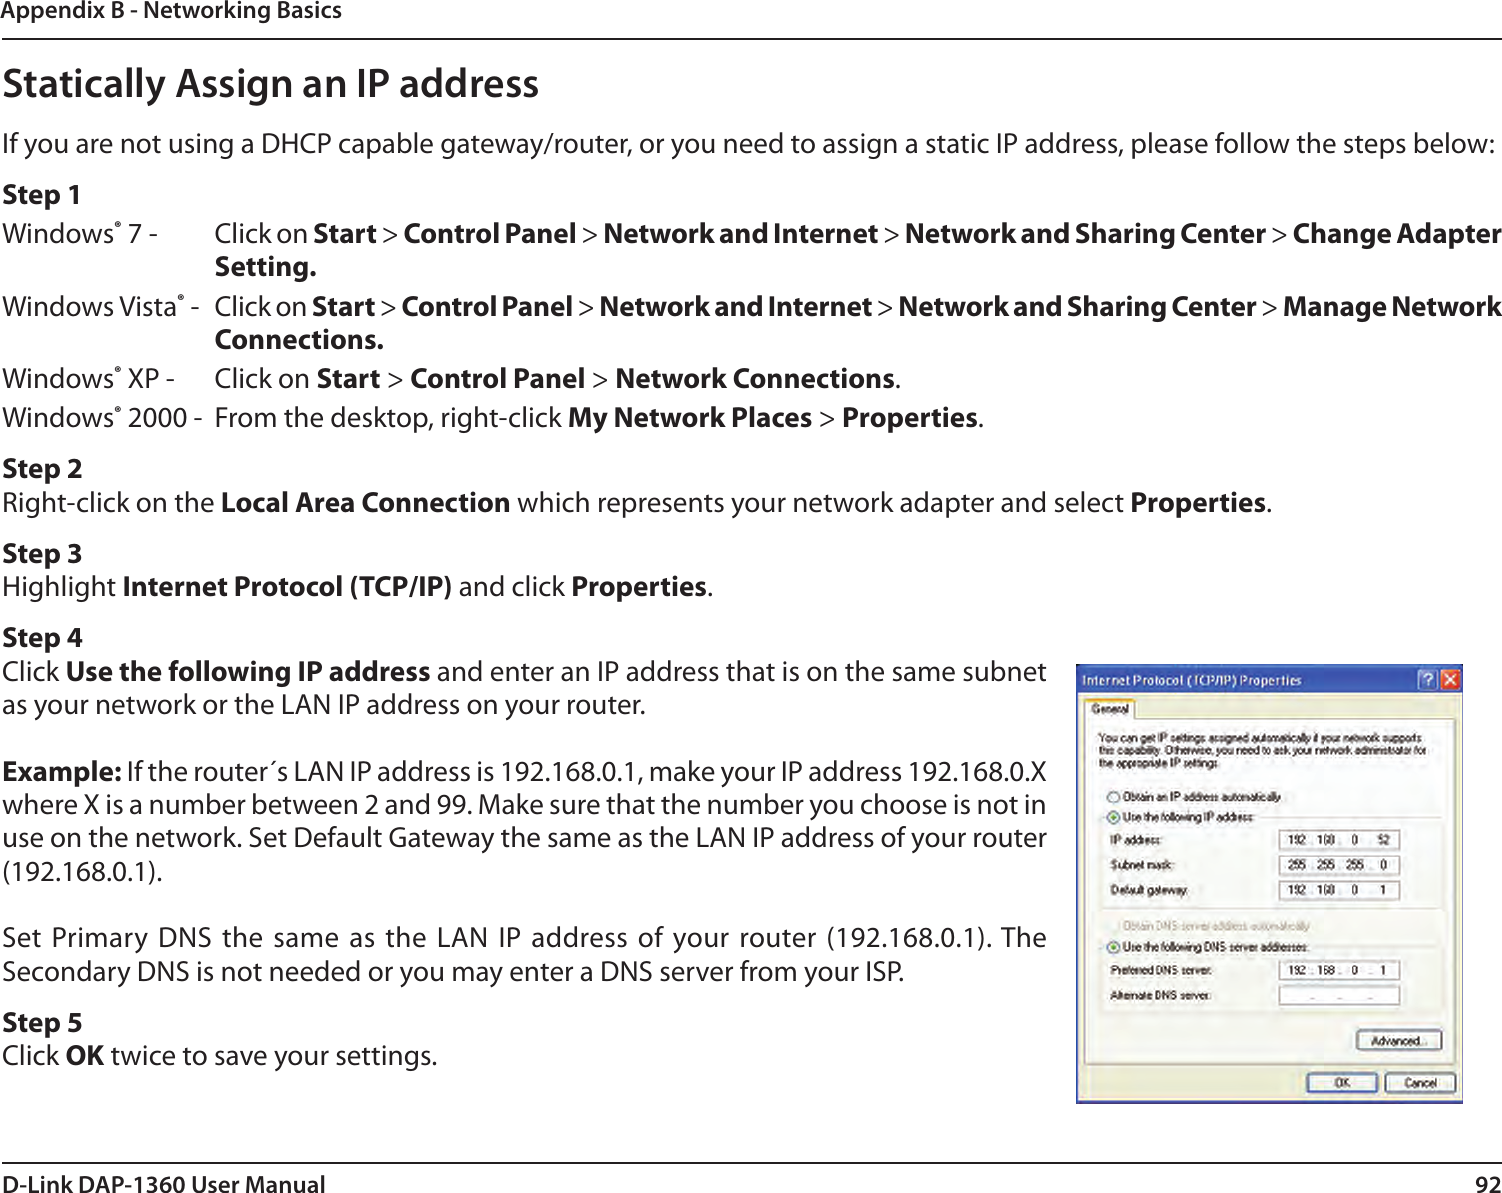 92D-Link DAP-1360 User ManualAppendix B - Networking BasicsStatically Assign an IP addressIf you are not using a DHCP capable gateway/router, or you need to assign a static IP address, please follow the steps below:Step 1Windows® 7 -  Click on Start &gt; Control Panel &gt; Network and Internet &gt; Network and Sharing Center &gt; Change Adapter Setting. Windows Vista® -  Click on Start &gt; Control Panel &gt; Network and Internet &gt; Network and Sharing Center &gt; Manage Network Connections.Windows® XP -  Click on Start &gt; Control Panel &gt; Network Connections.Windows® 2000 -  From the desktop, right-click My Network Places &gt; Properties.Step 2Right-click on the Local Area Connection which represents your network adapter and select Properties.Step 3Highlight Internet Protocol (TCP/IP) and click Properties.Step 4Click Use the following IP address and enter an IP address that is on the same subnet as your network or the LAN IP address on your router.Example: If the router´s LAN IP address is 192.168.0.1, make your IP address 192.168.0.X where X is a number between 2 and 99. Make sure that the number you choose is not in use on the network. Set Default Gateway the same as the LAN IP address of your router (192.168.0.1). Set Primary DNS the same as the LAN  IP address of your router (192.168.0.1). The Secondary DNS is not needed or you may enter a DNS server from your ISP.Step 5Click OK twice to save your settings.